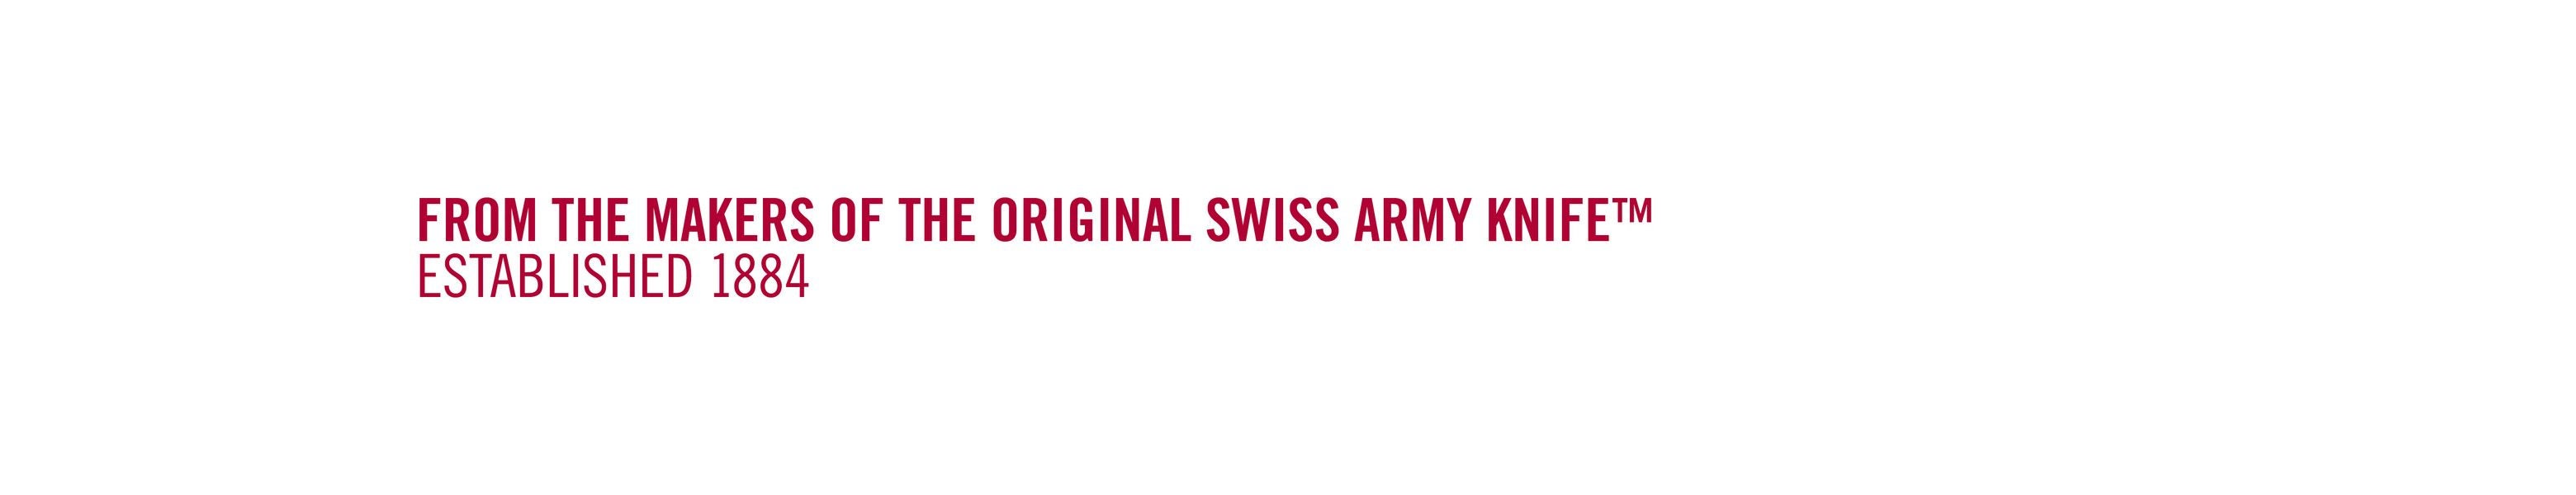 original makers of the swiss army knife footer 